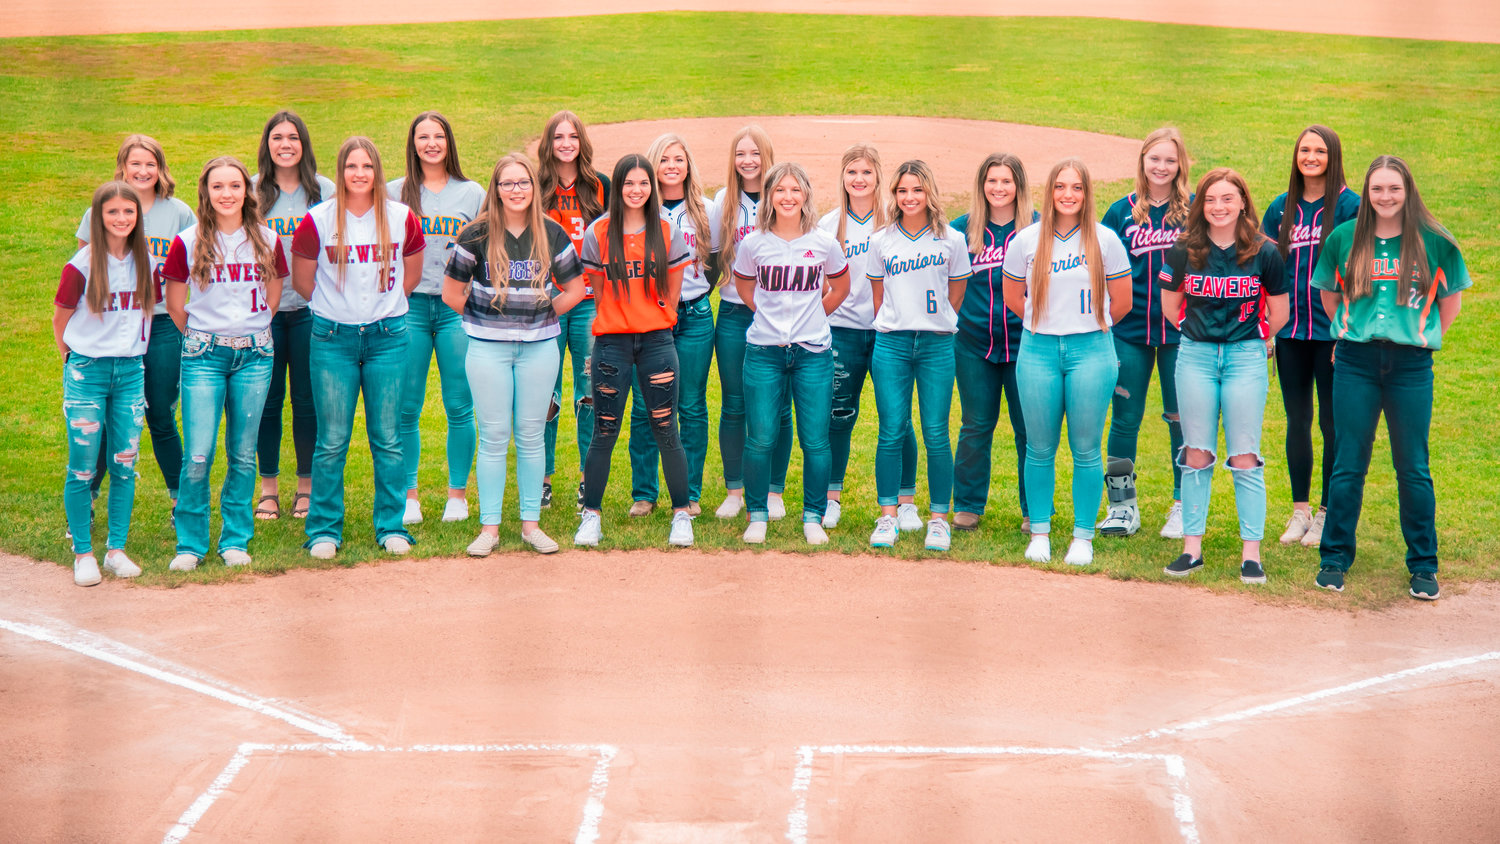 The All-Area Softball team poses for a photo at Wheeler Field in Centralia on Monday.